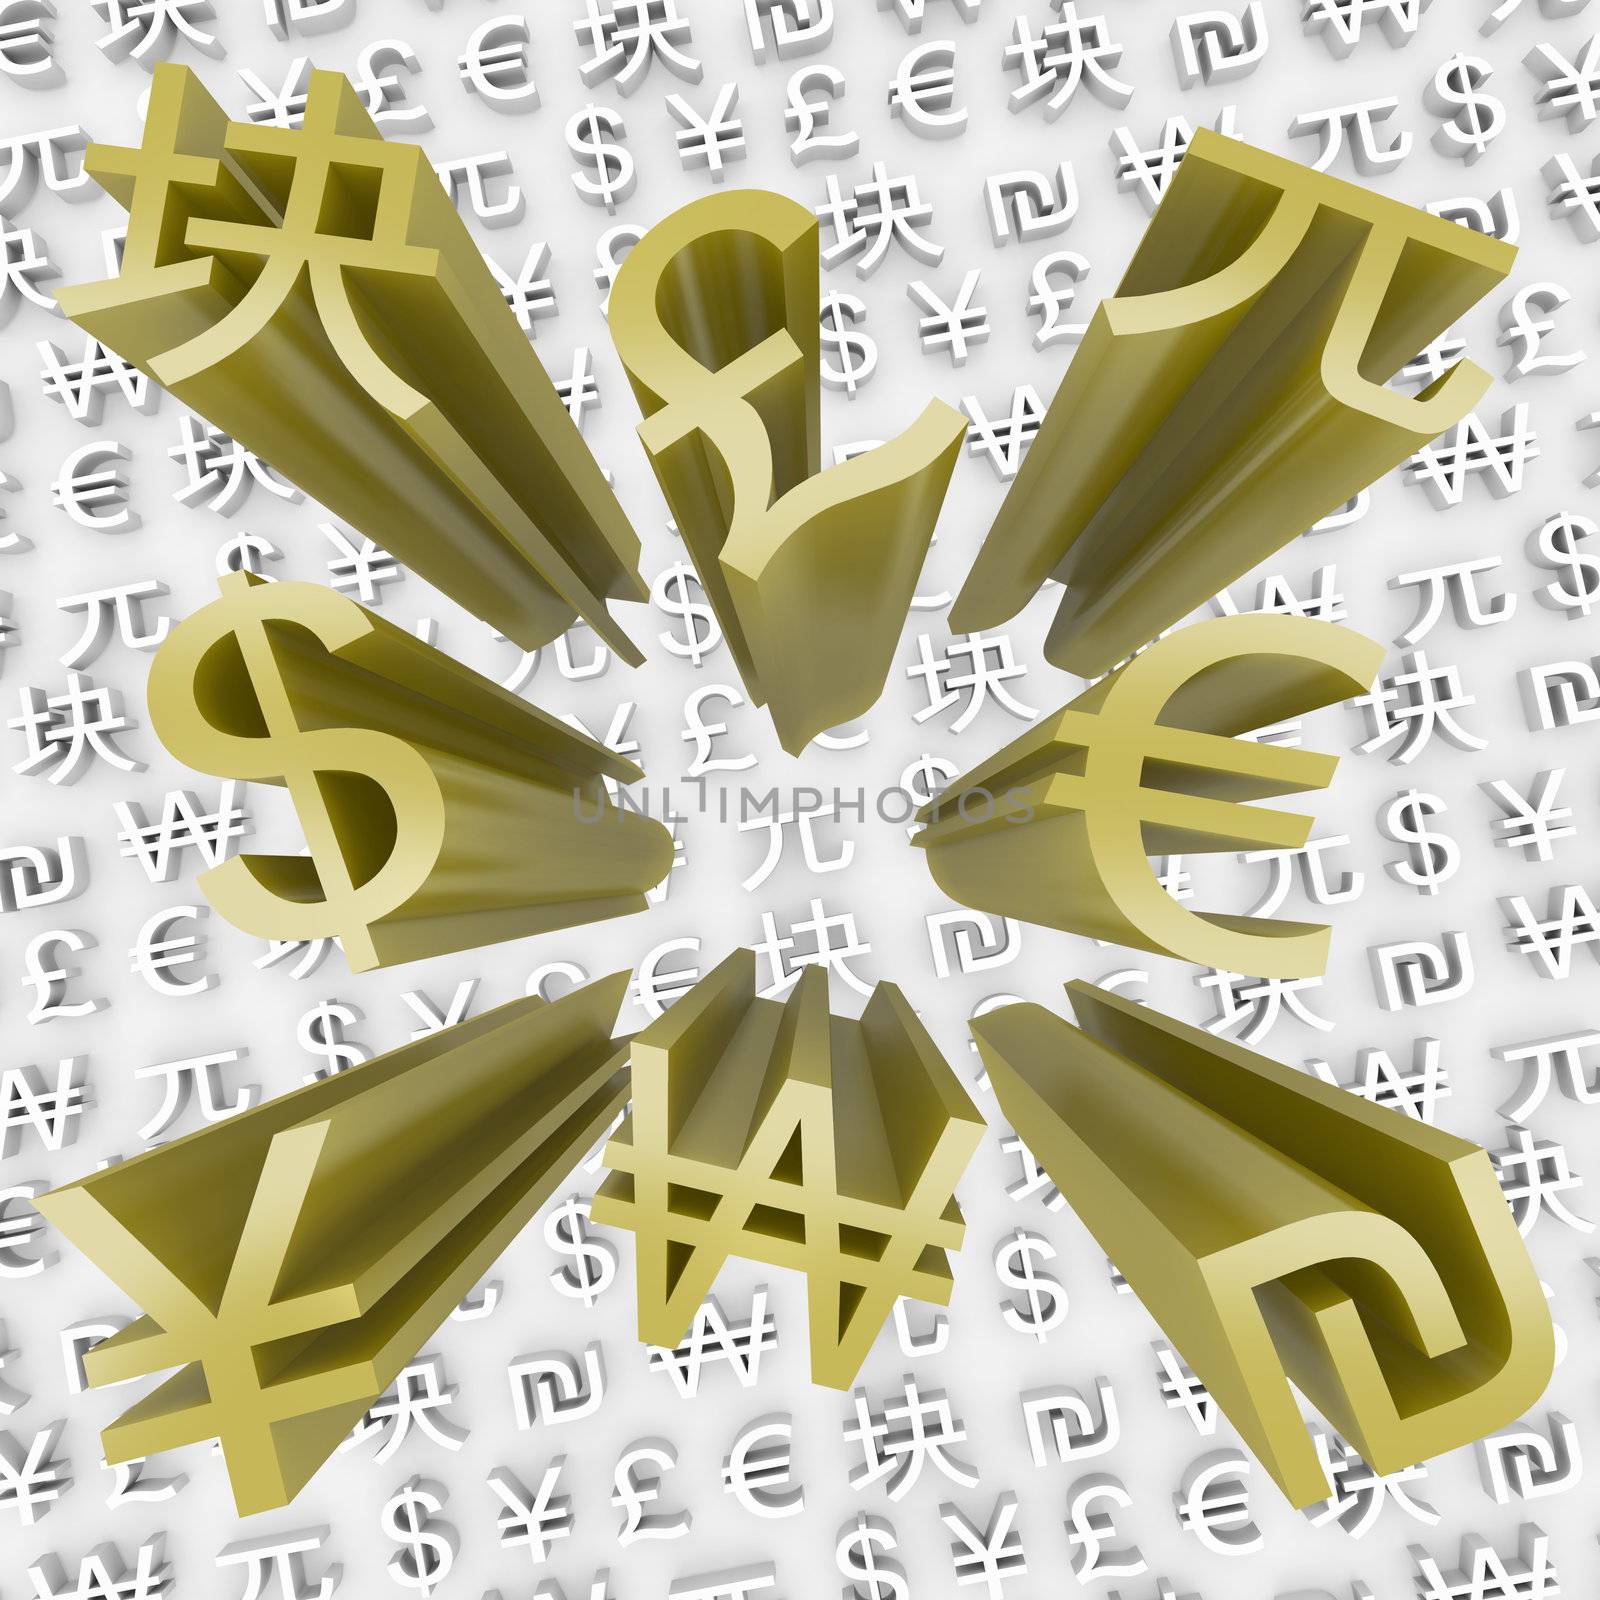 Many gold currency symbols come flying out of money background